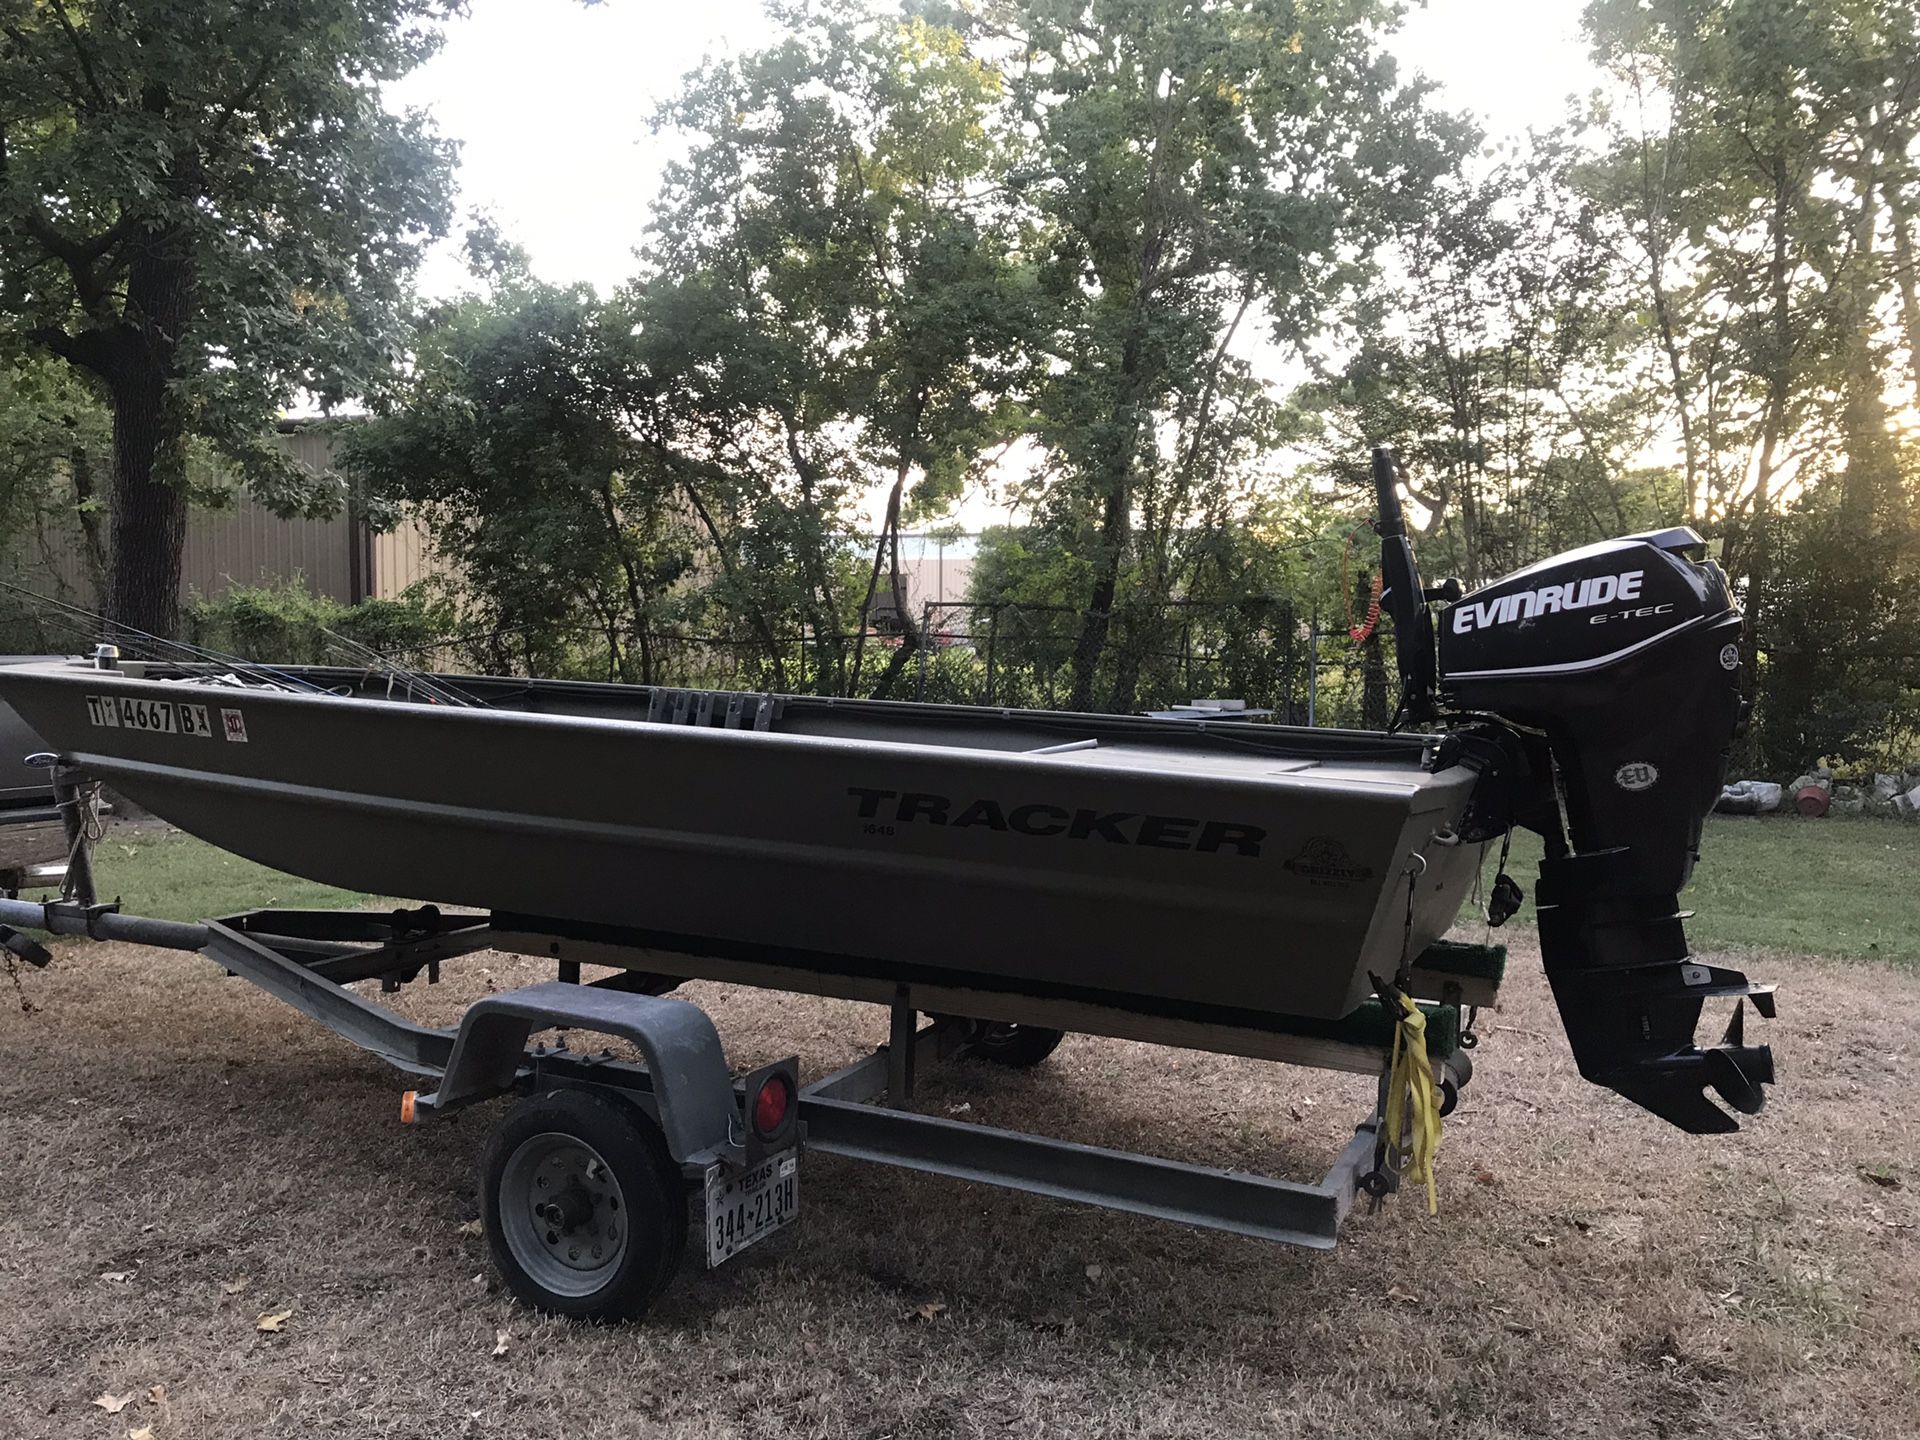 2013 -16 ft. Tracker boat, trailer and 2008 - 25 horse power Evinrude Motor